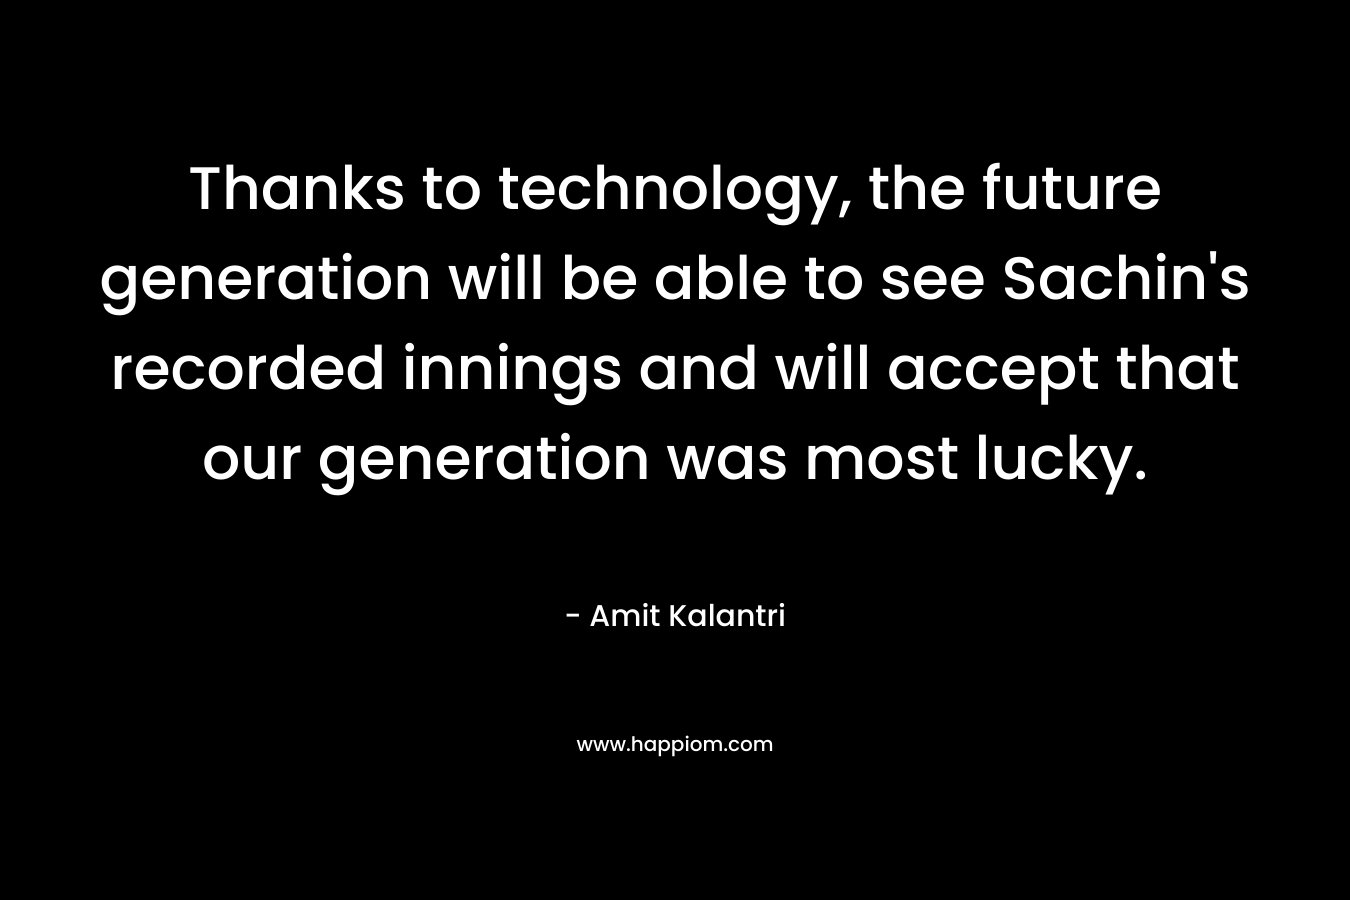 Thanks to technology, the future generation will be able to see Sachin’s recorded innings and will accept that our generation was most lucky. – Amit Kalantri